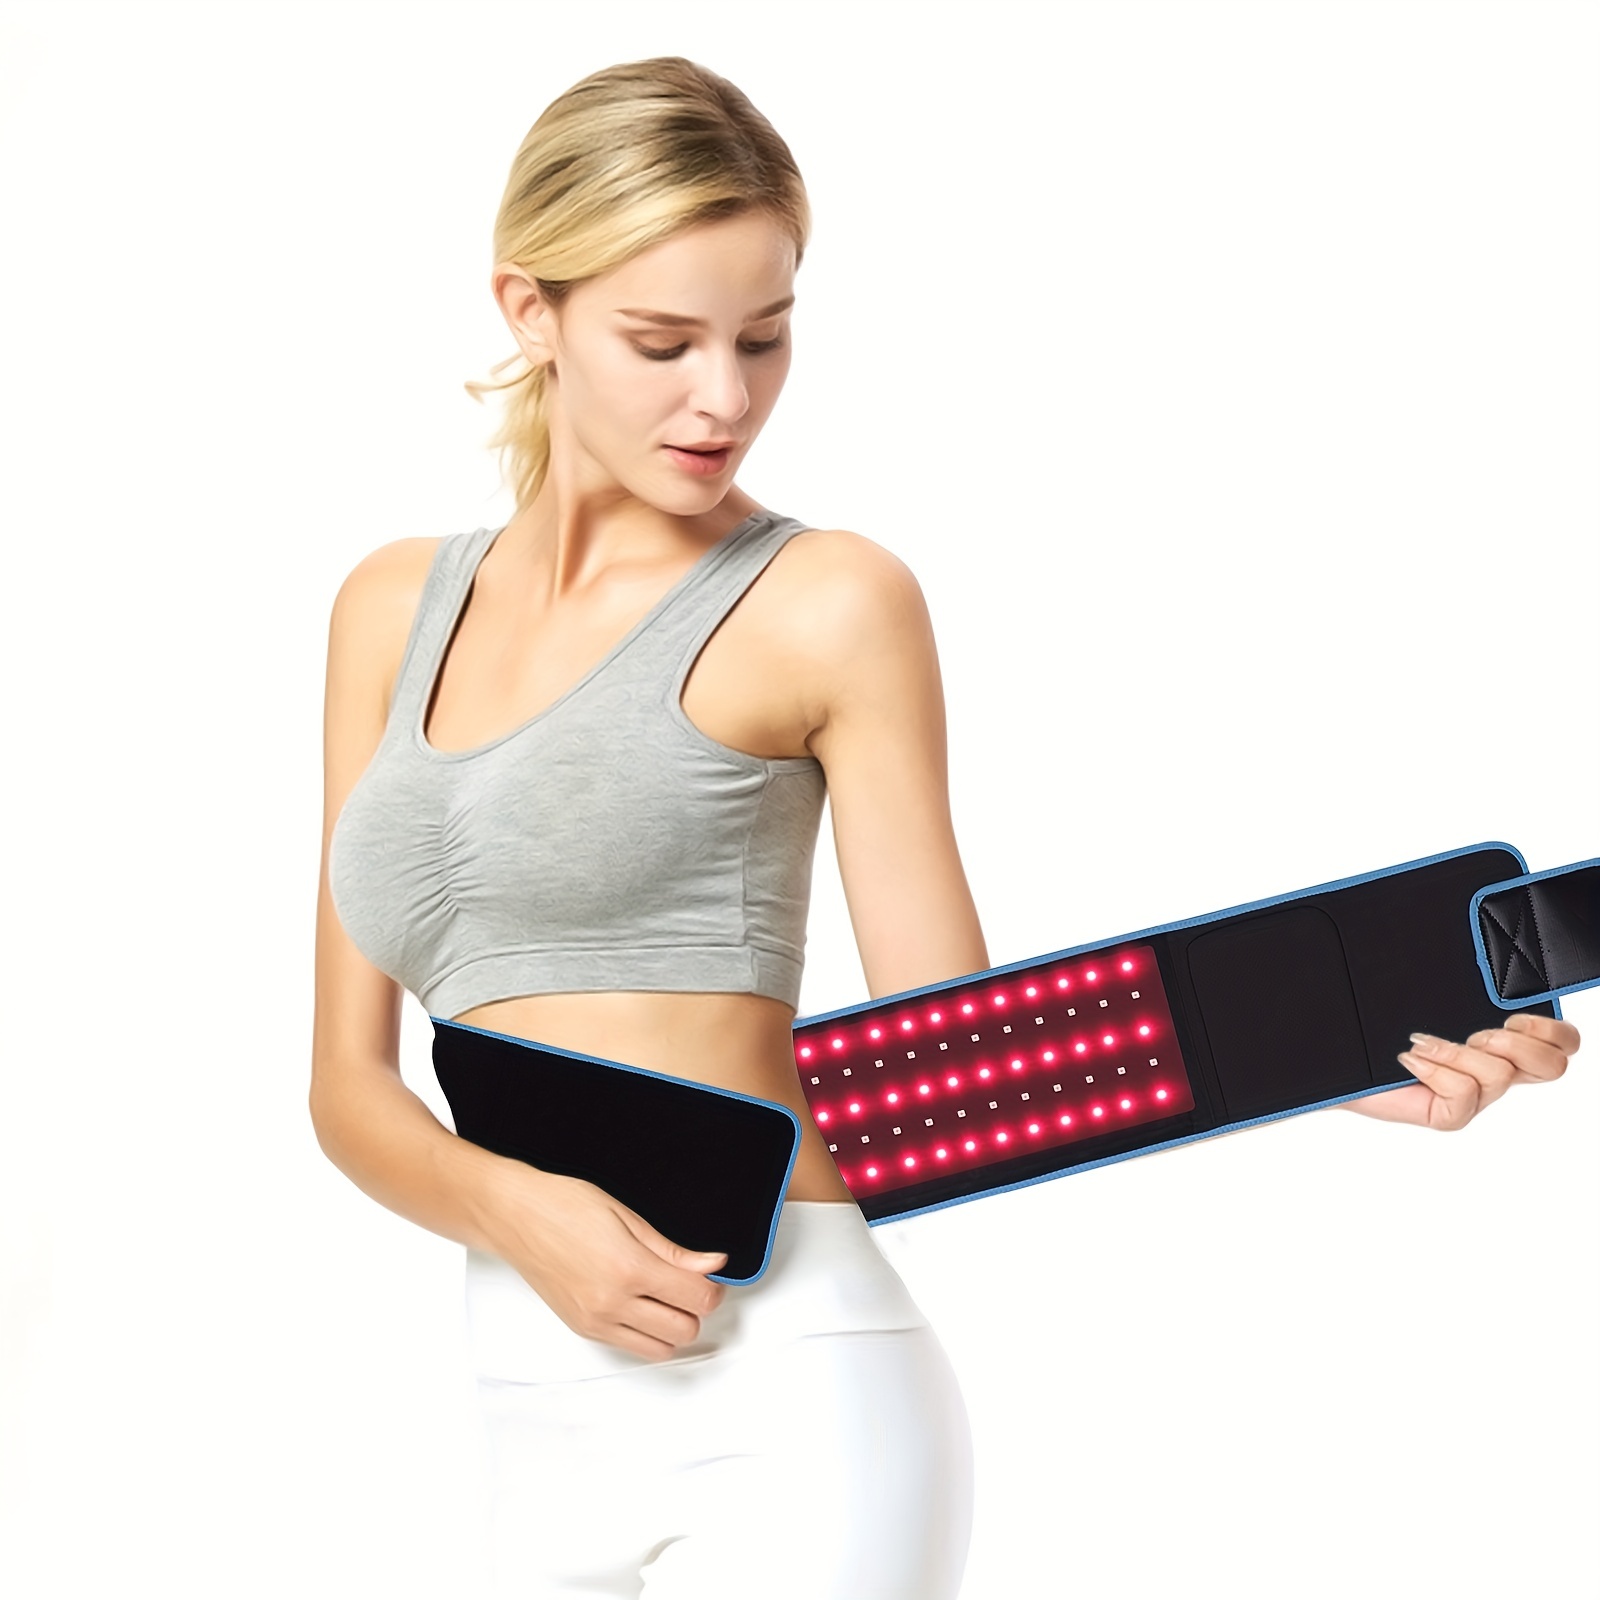 Comfytemp Red Light Therapy Belt, FSA HSA Eligible Infrared Red Light  Therapy for Body, Infrared Light Wrap with Pulse for Back Waist Muscle Pain